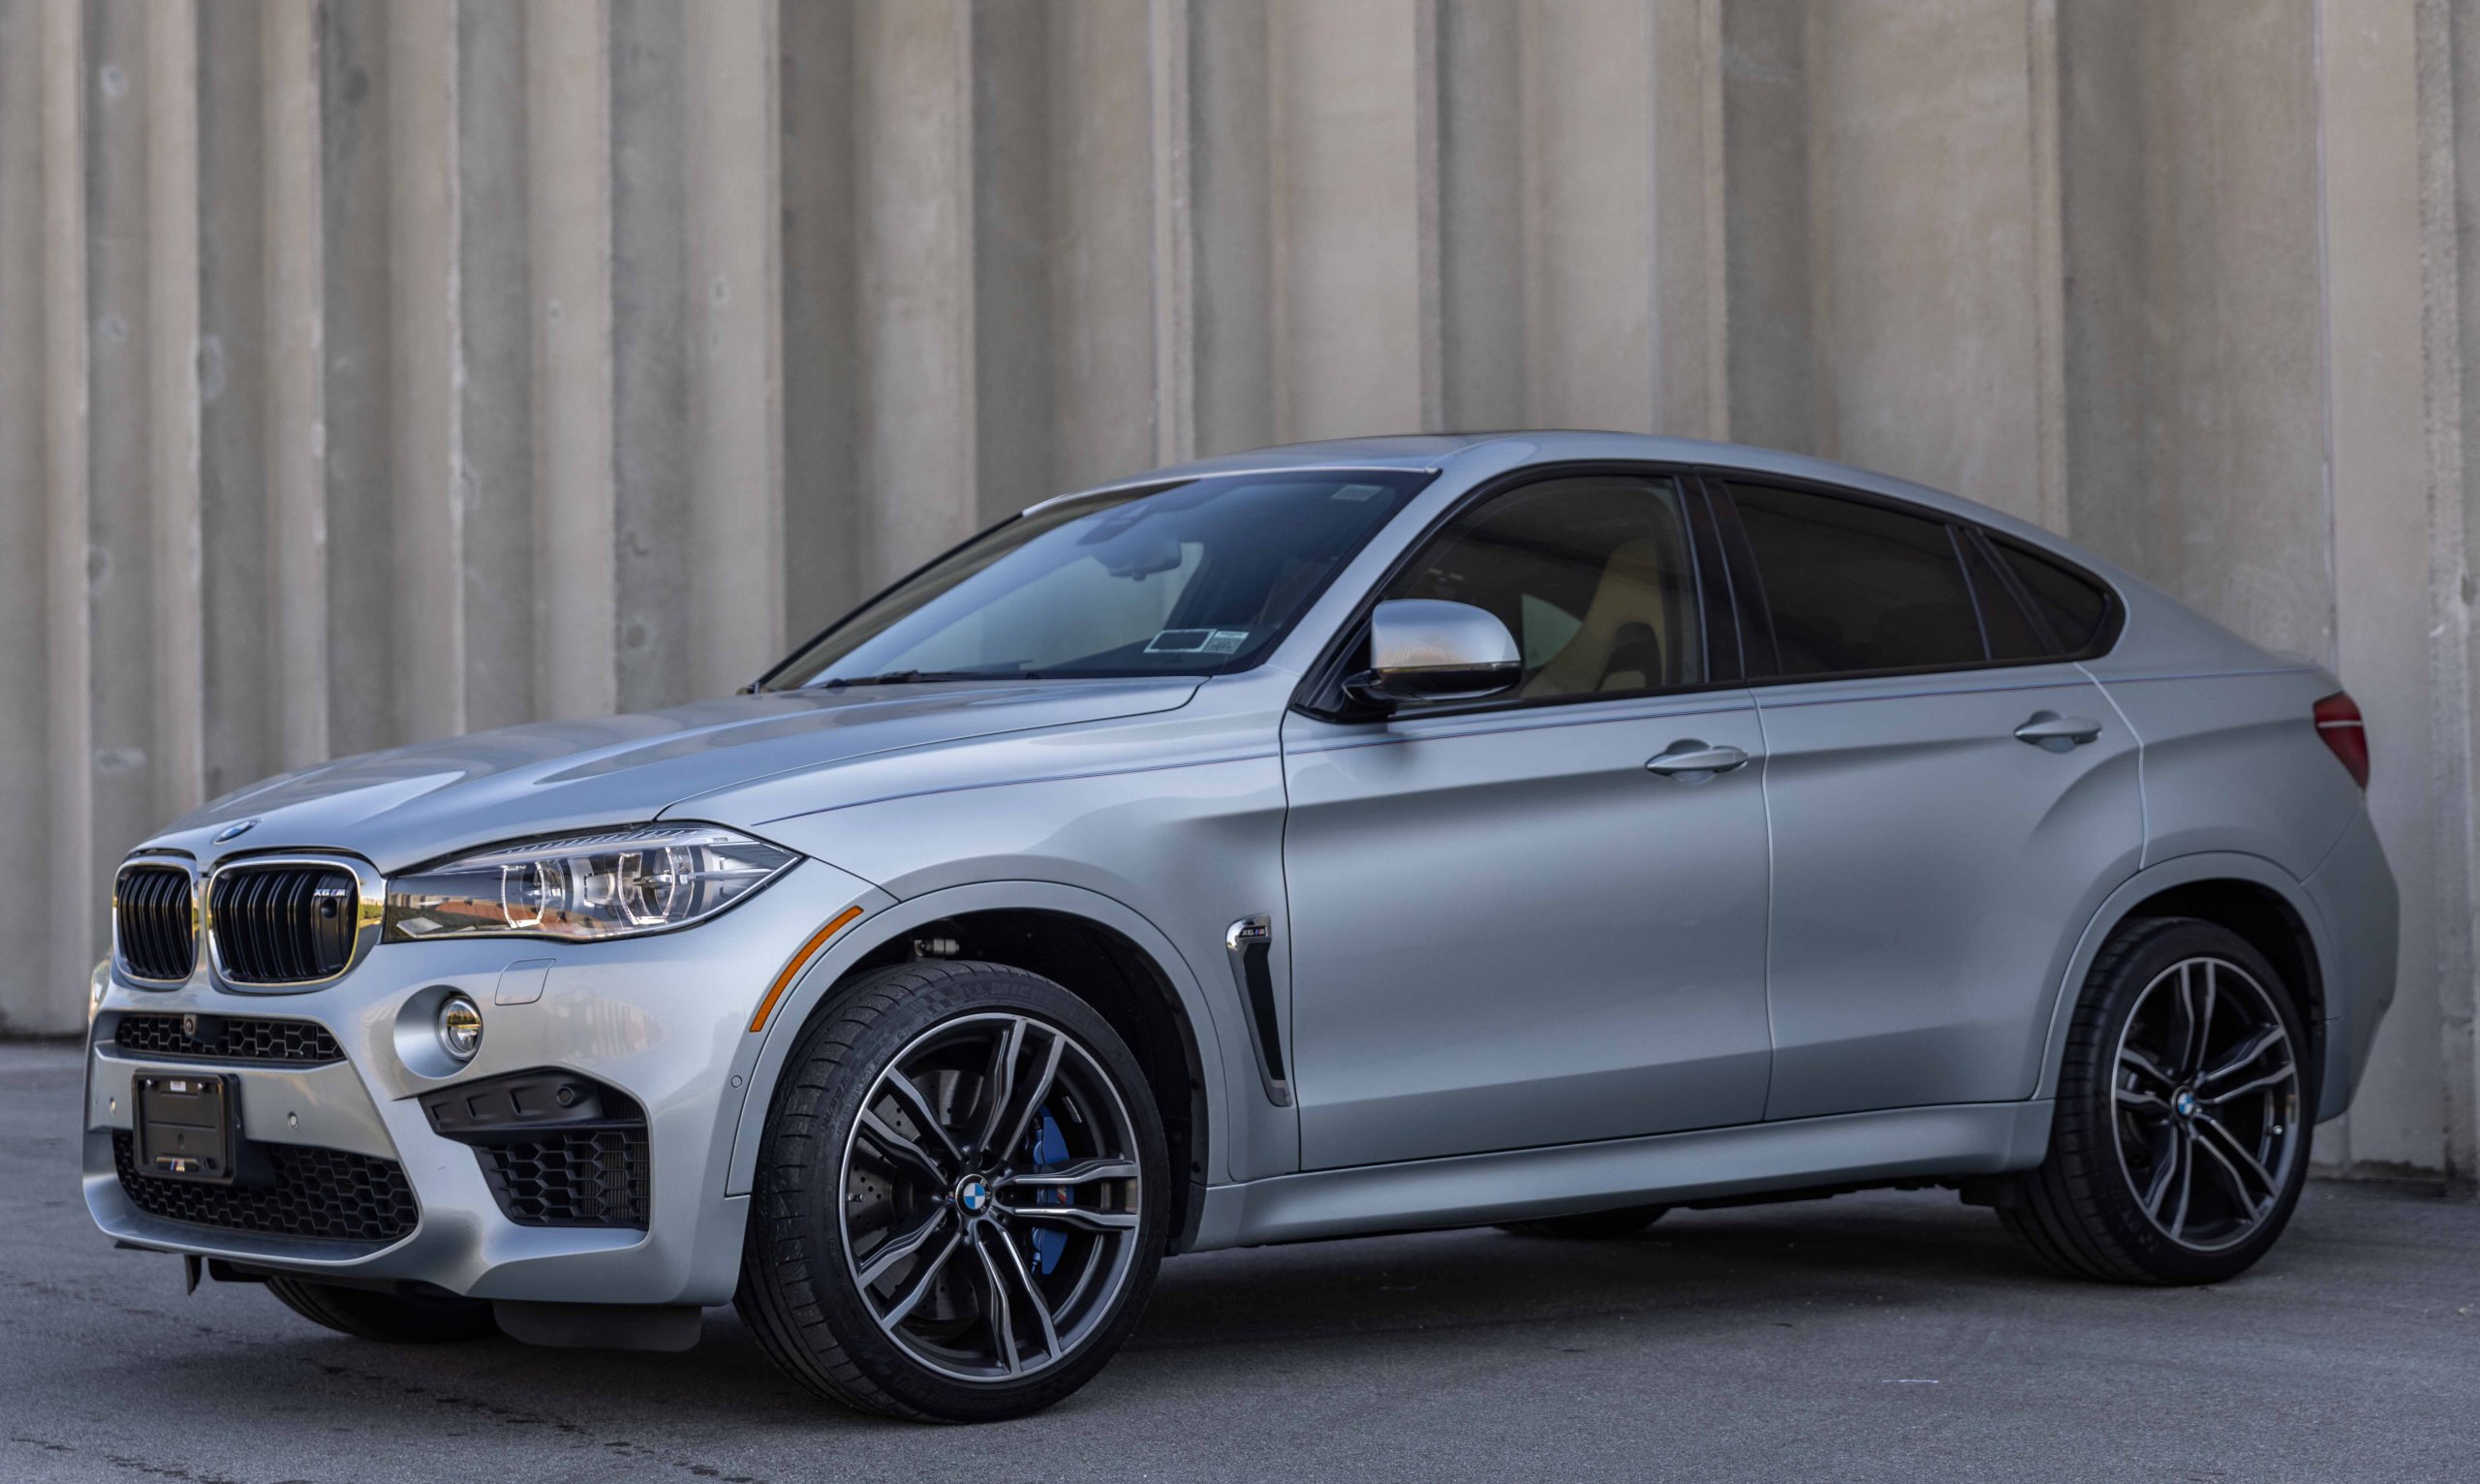 BMW X6 M Buyers Guide